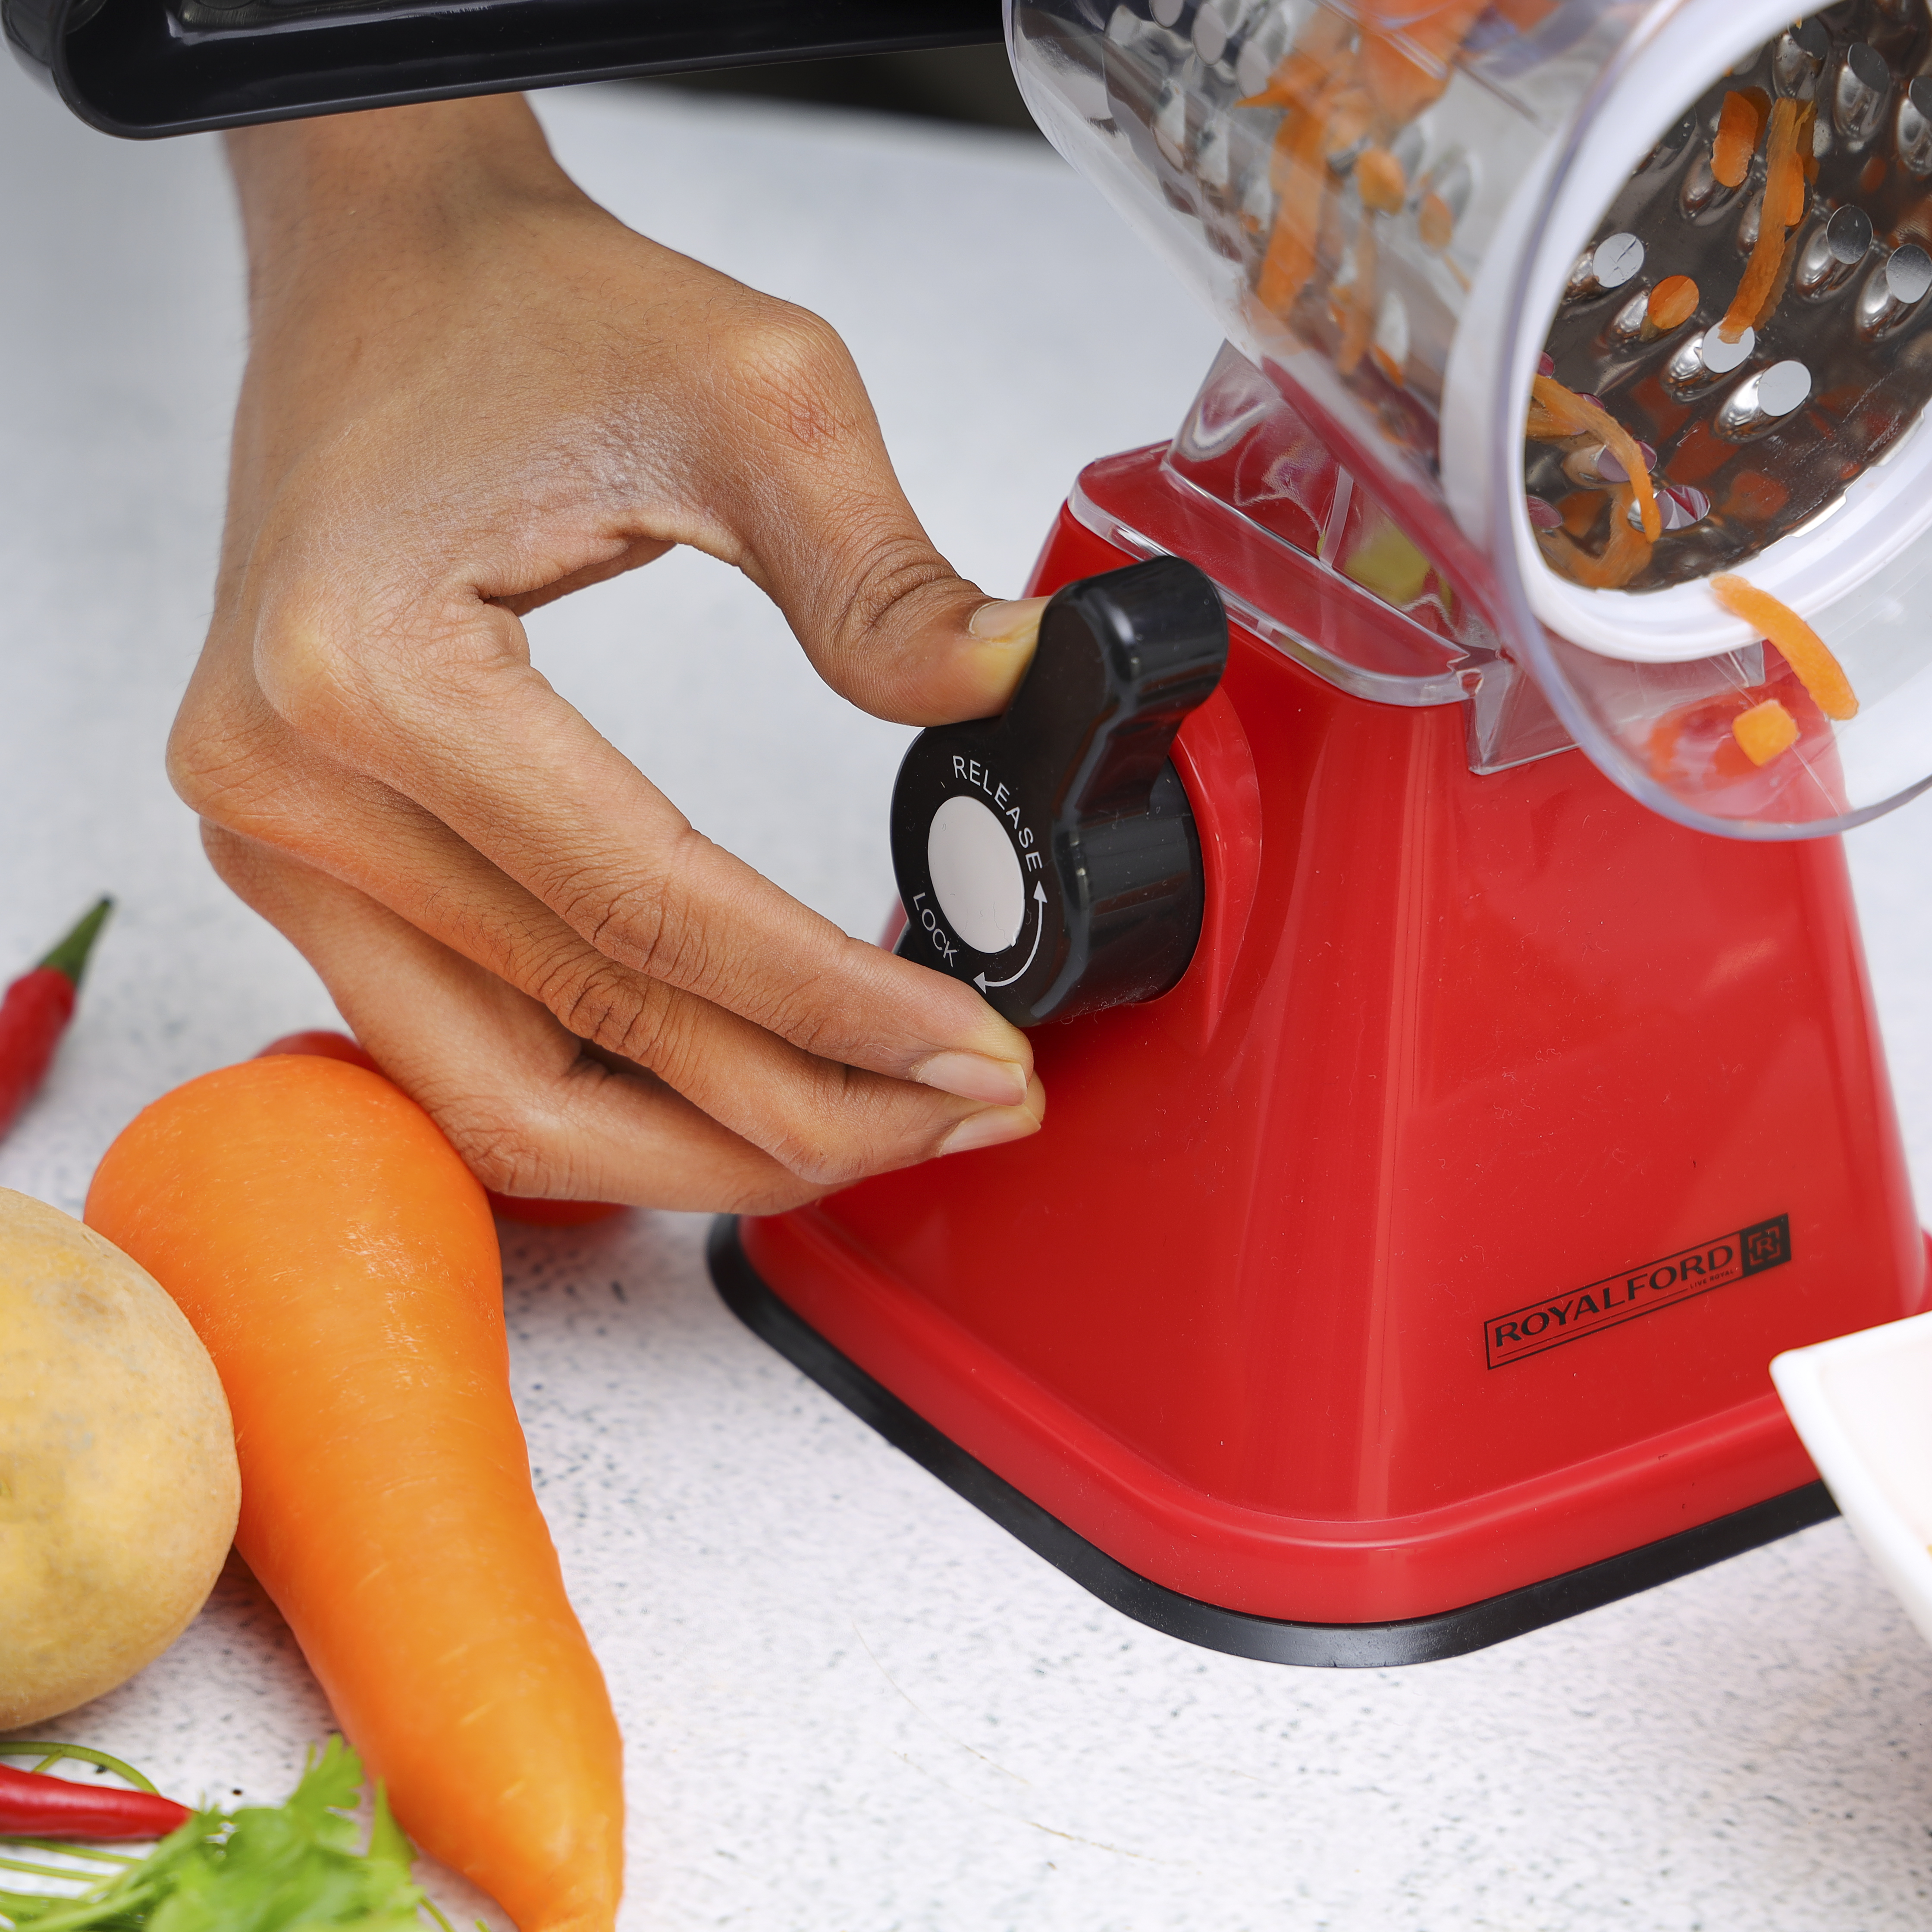 World of Confectioners - Rotary vegetable slicer 3in1 - Kitchen